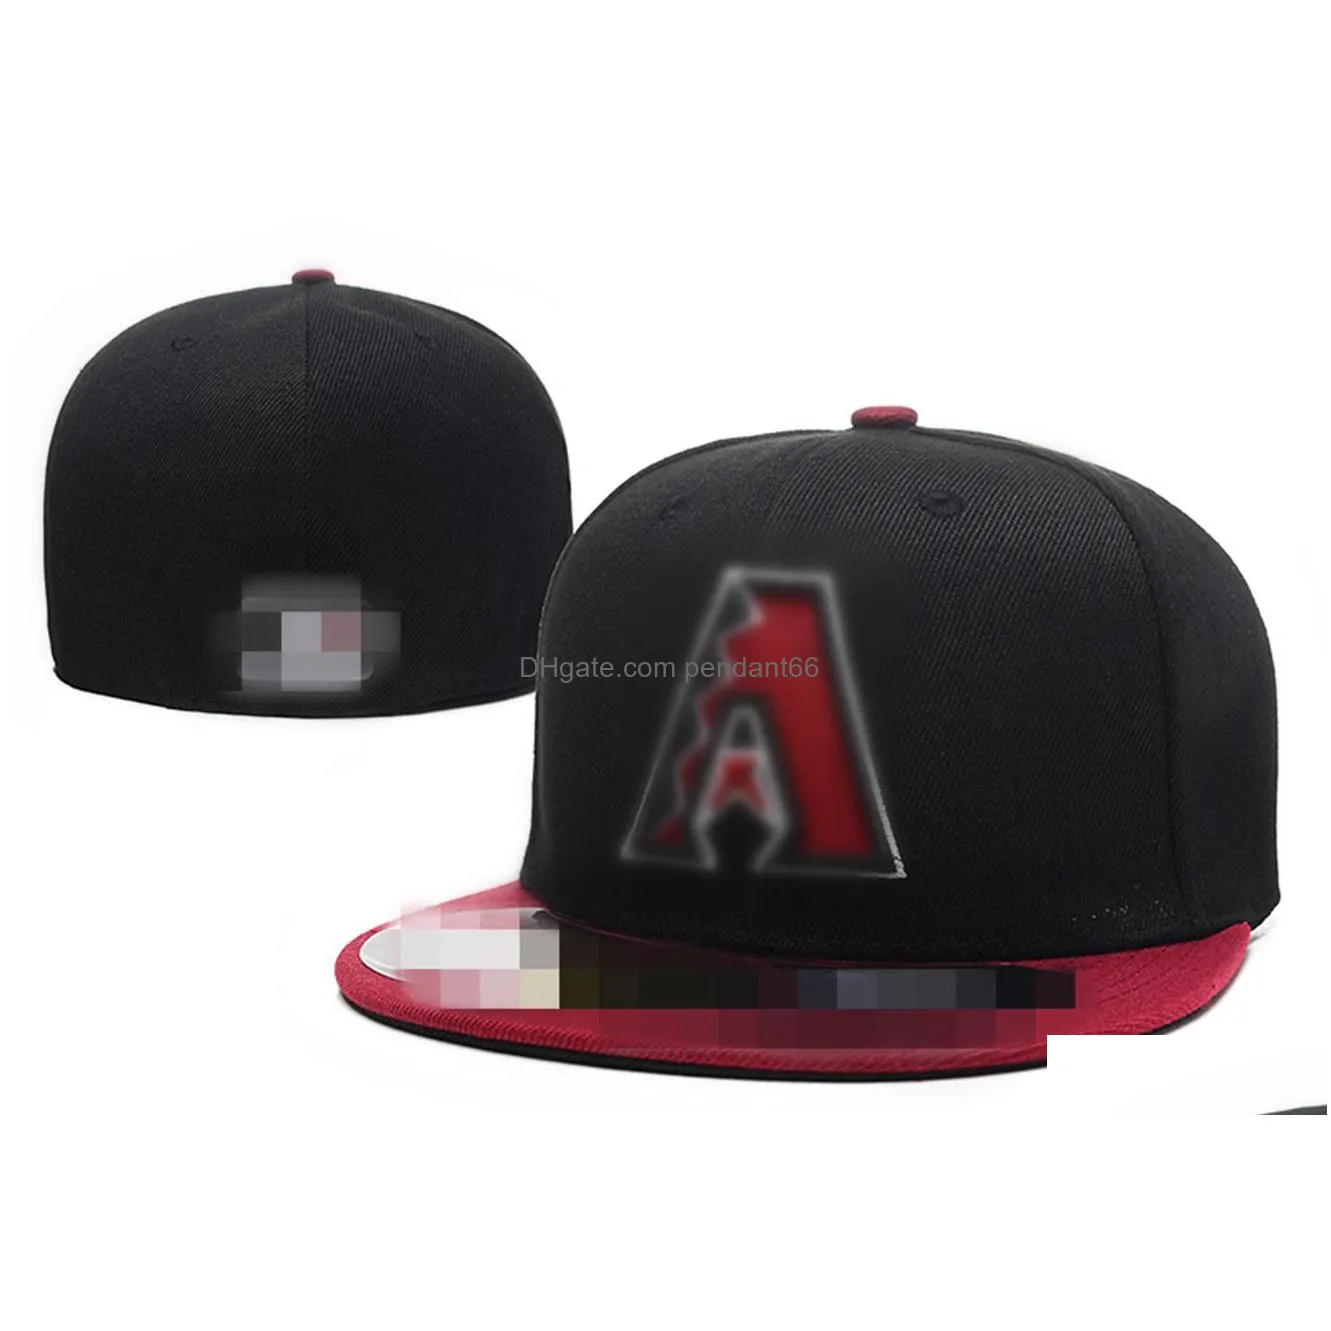  men fashion hip hop snapback hats  flat peak full size closed caps all team fitted hats in size 7- 8 h6-7.14